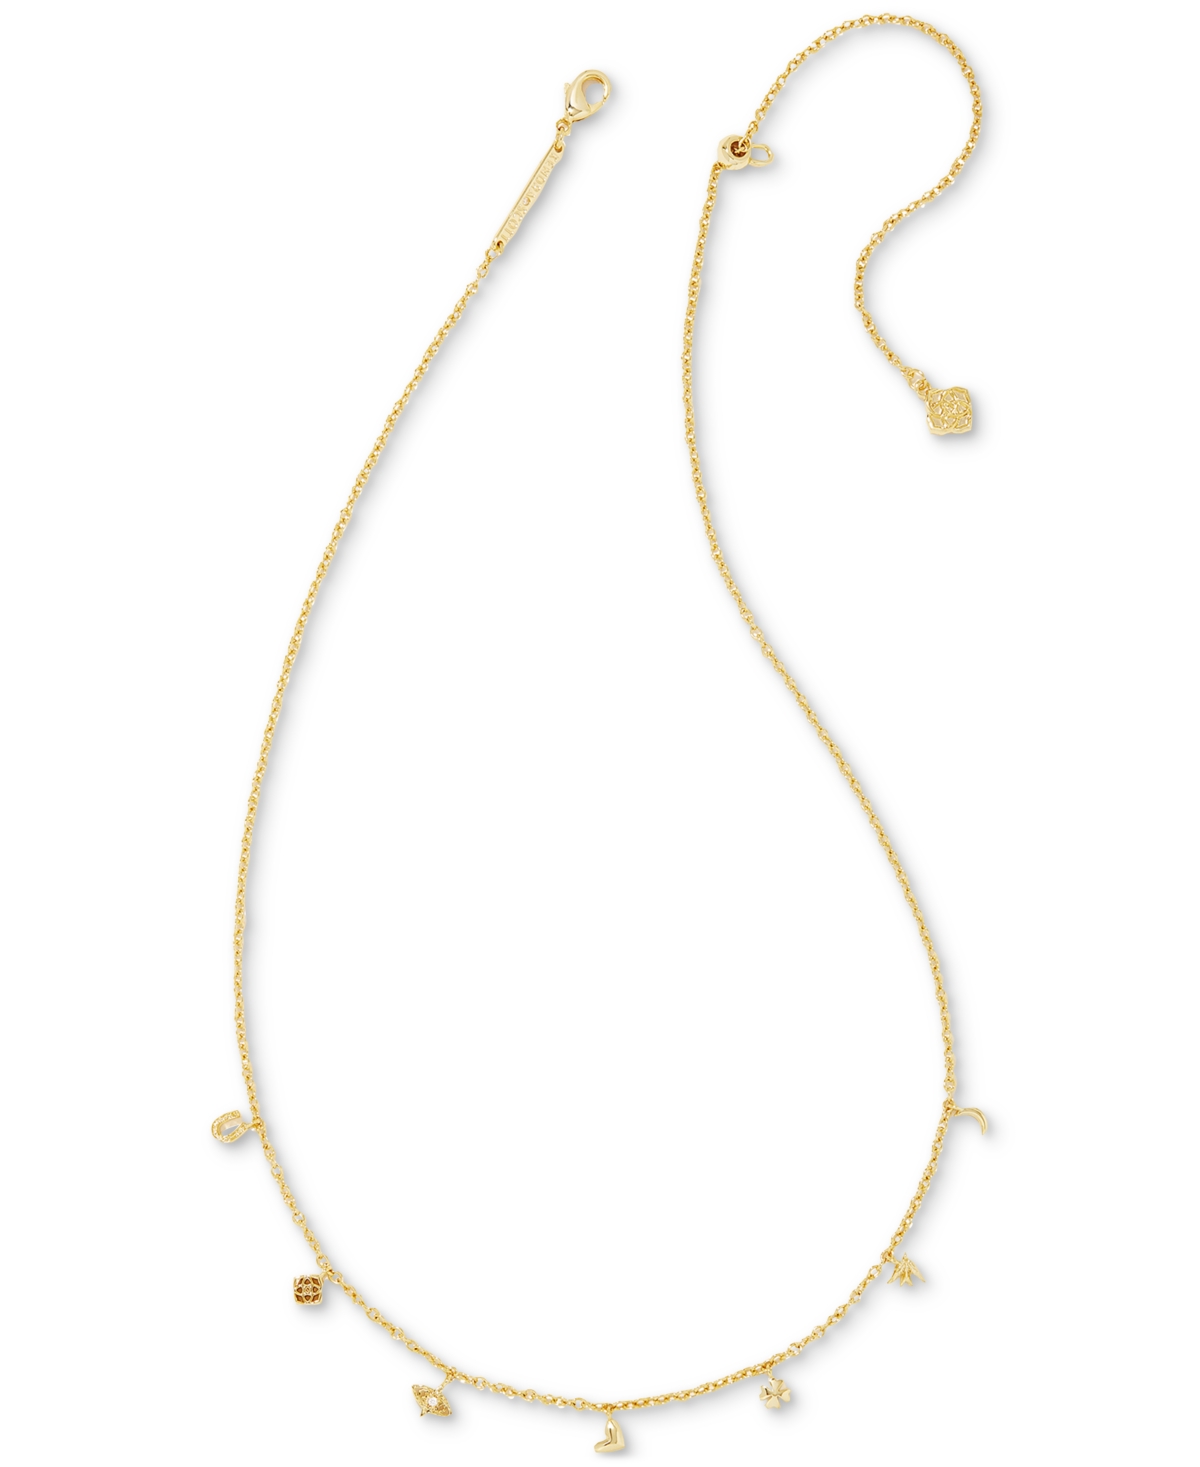 Kendra Scott Beatrix Charm Strand Necklace, 16" + 3" Extender In Gold